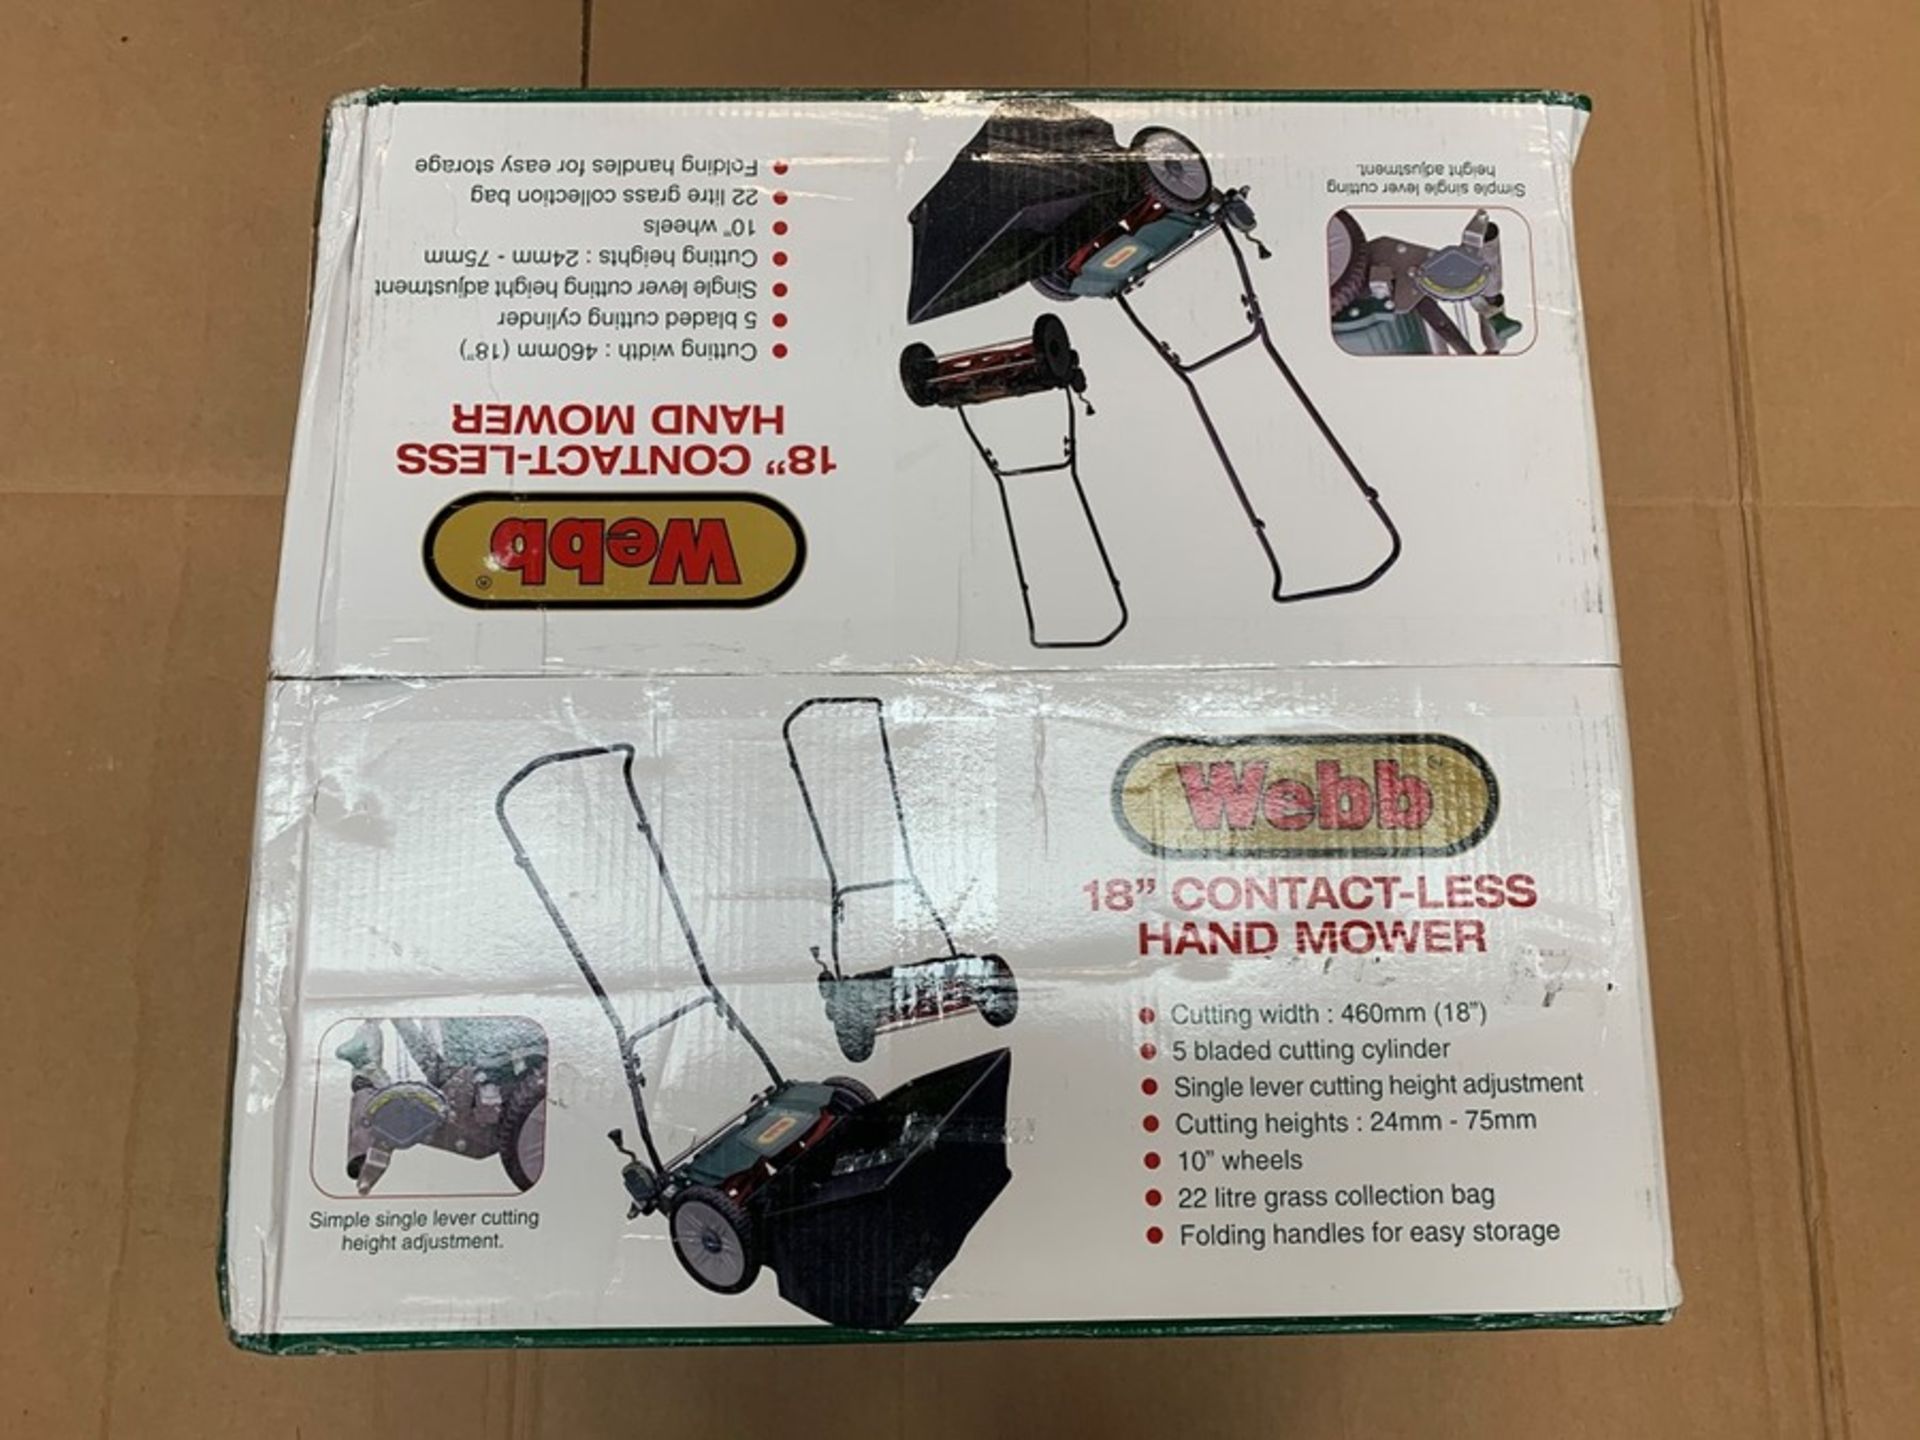 1 BOXED UNTESTED WEBB 18" CONTACTLESS HAND MOWER / RRP £87.99 (PUBLIC VIEWING AVAILABLE)